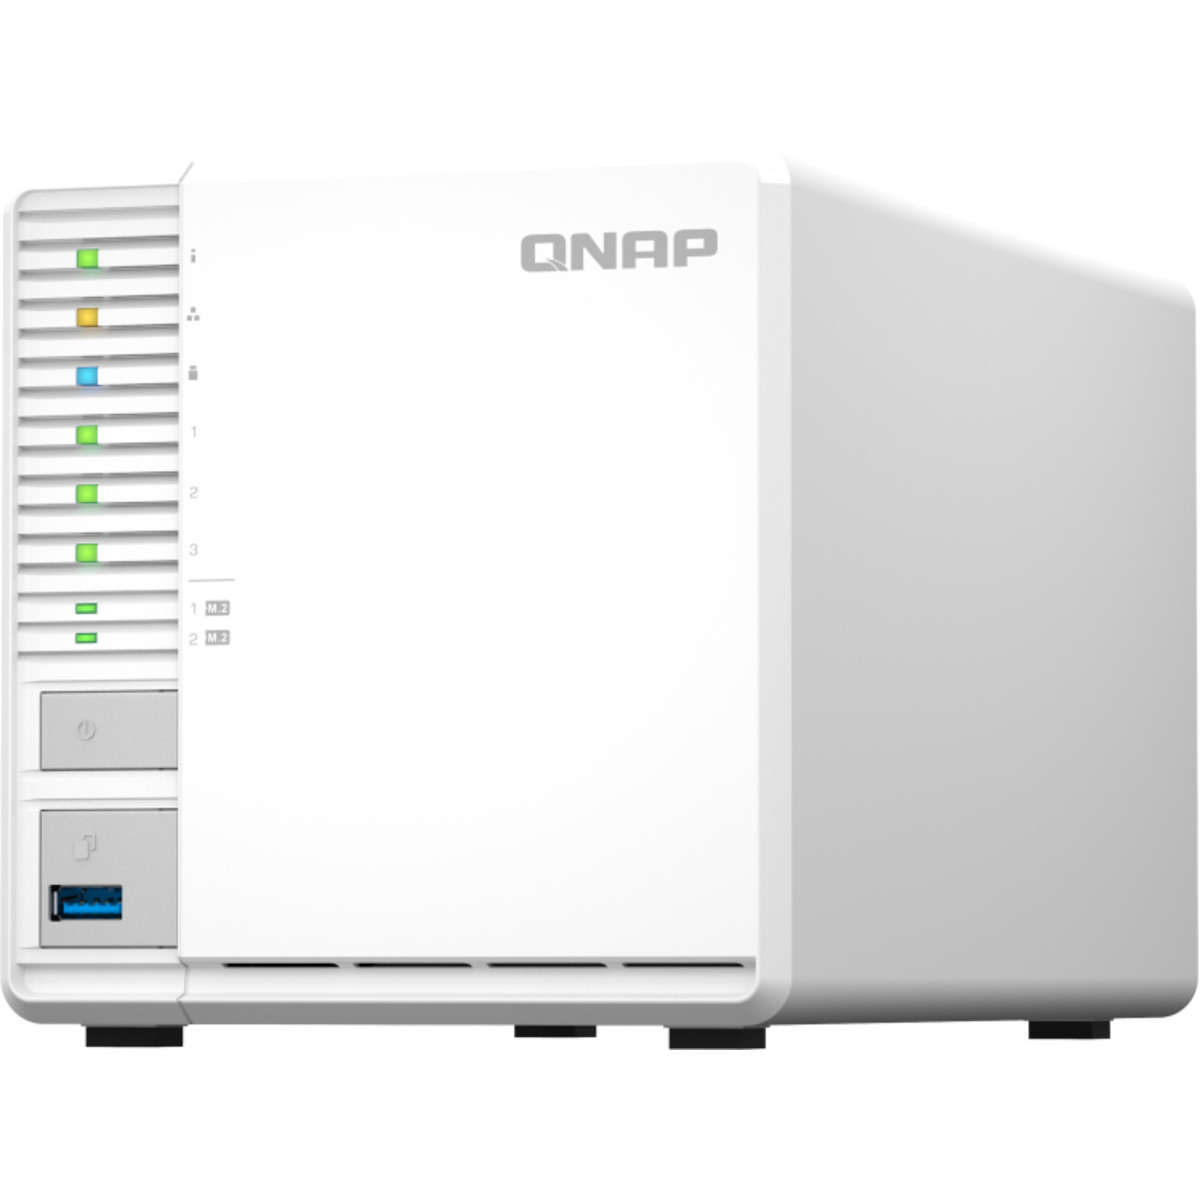 QNAP TS-364 44tb 3-Bay Desktop Multimedia / Power User / Business NAS - Network Attached Storage Device 2x22tb Seagate EXOS X22 ST22000NM001E 3.5 7200rpm SATA 6Gb/s HDD ENTERPRISE Class Drives Installed - Burn-In Tested TS-364